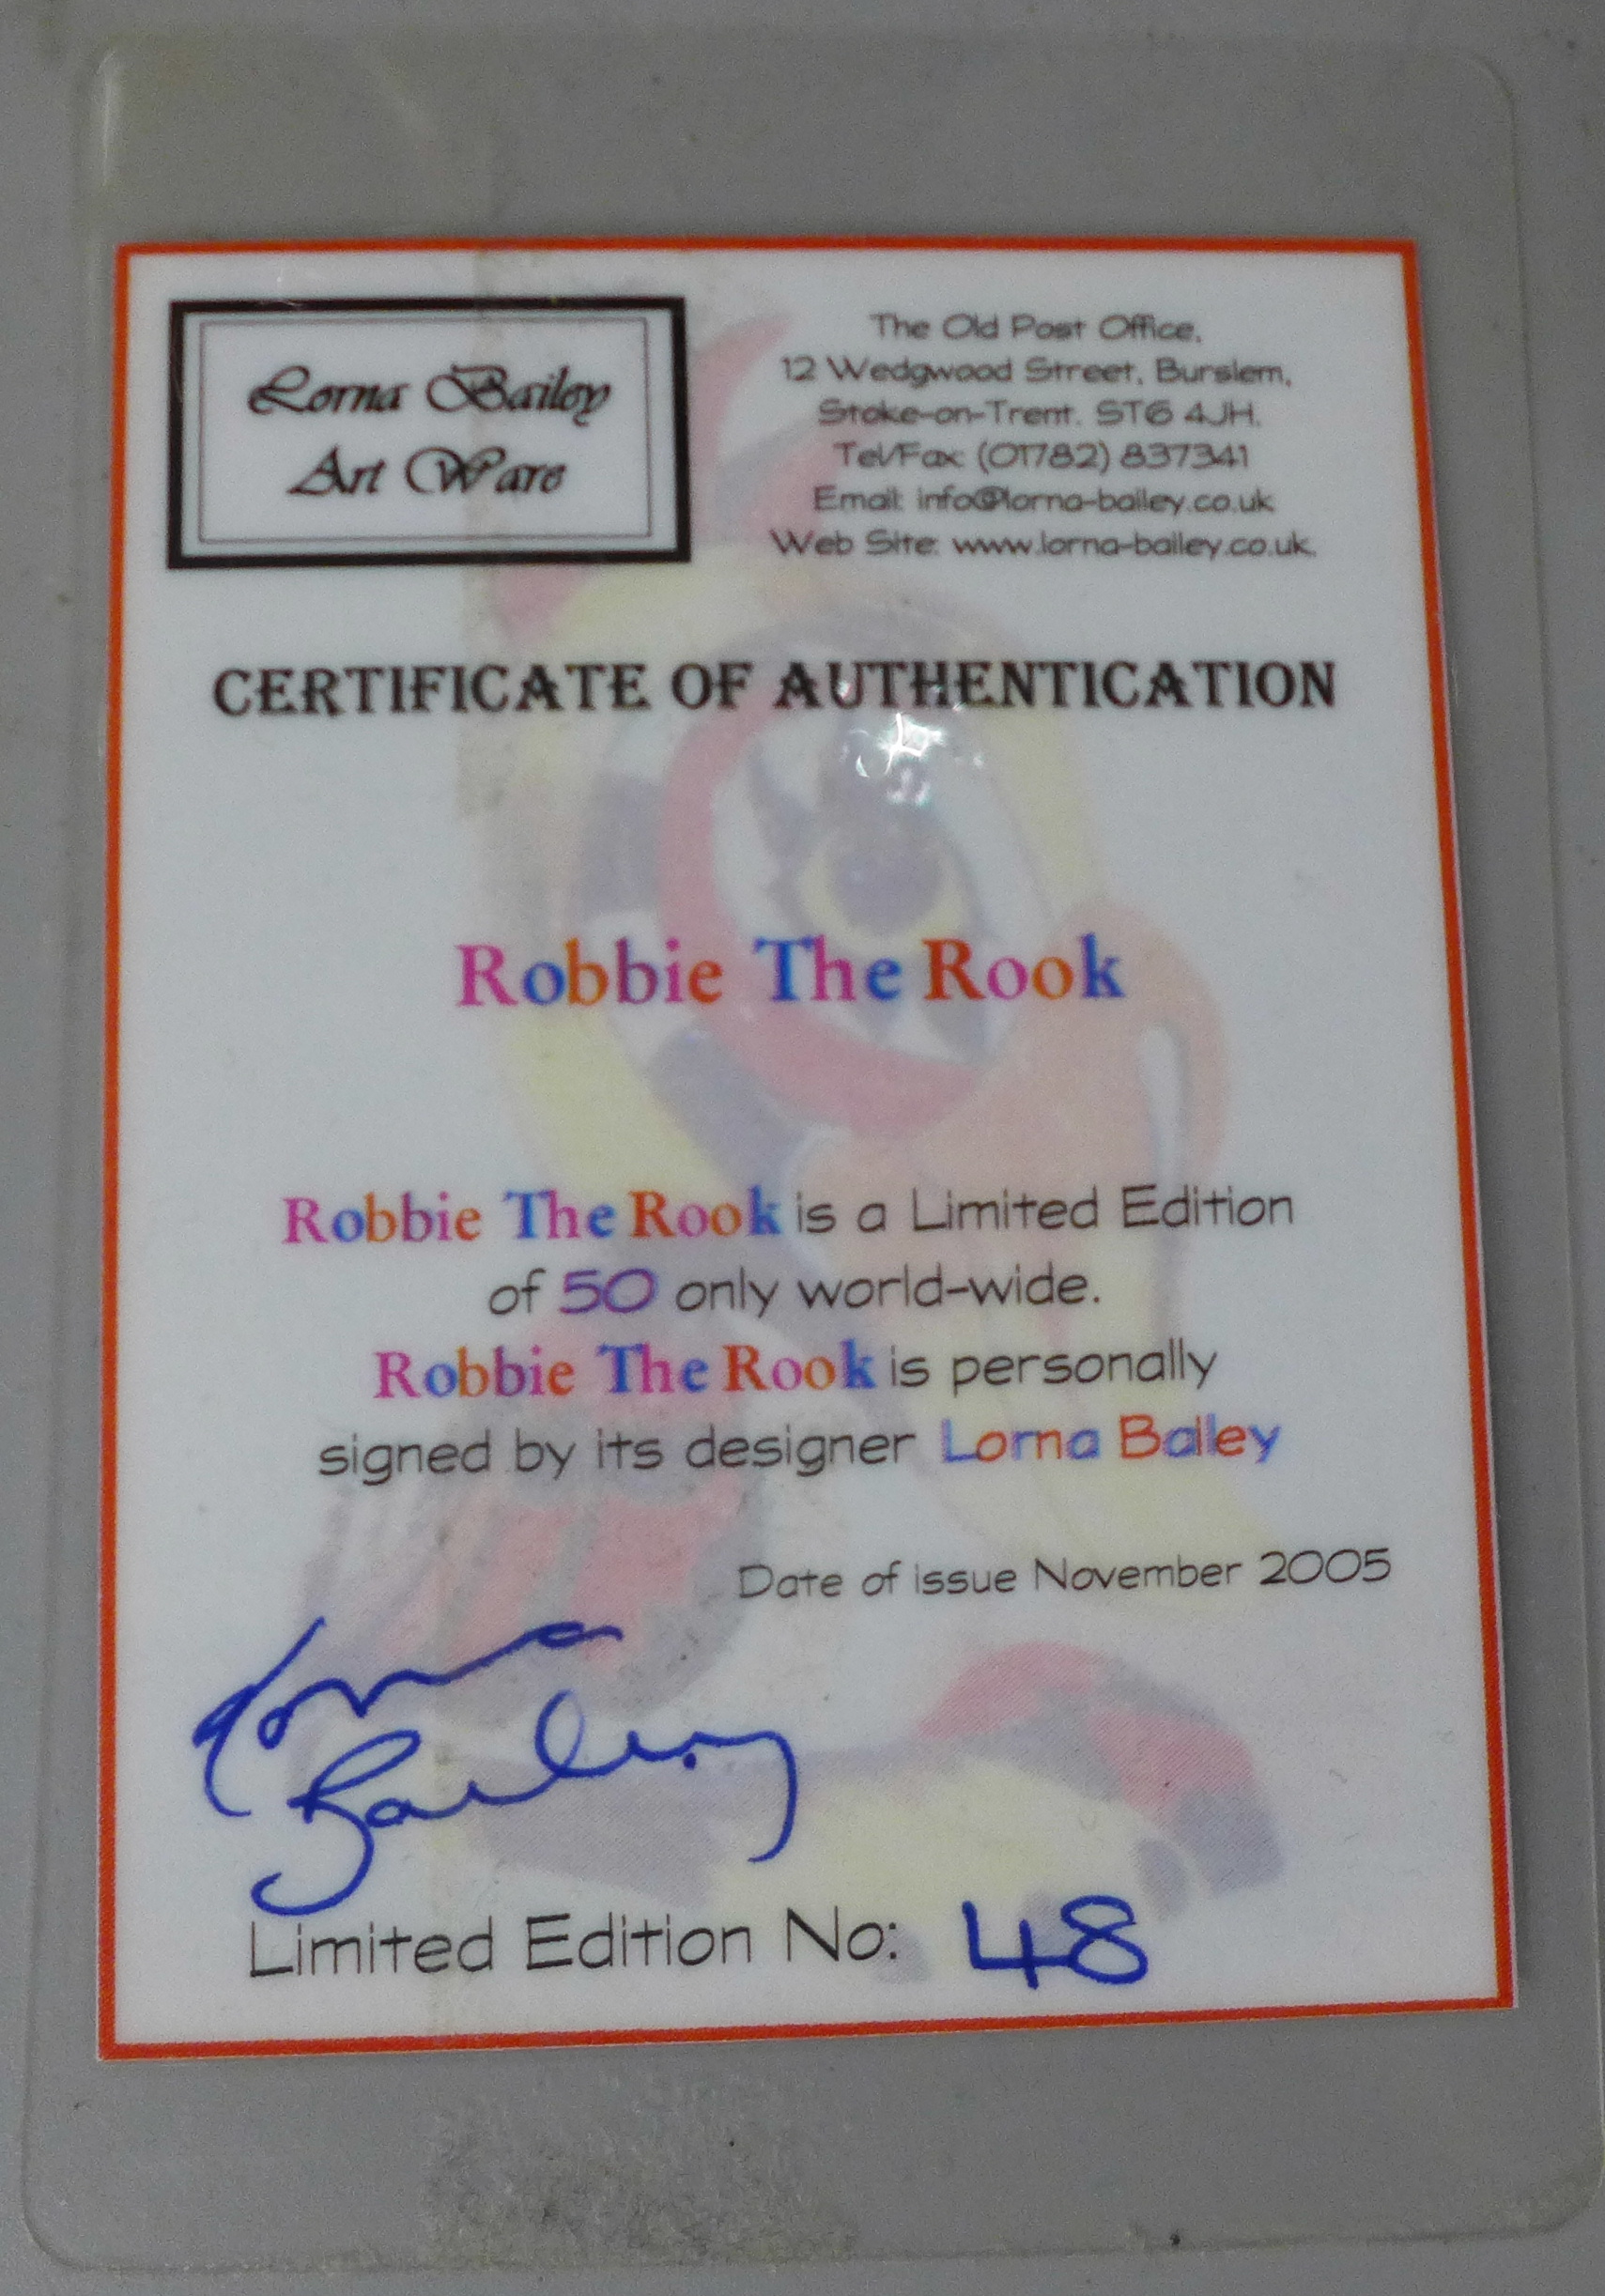 A Lorna Bailey Robbie The Rook S150 limited edition no. 48, a/f (crack and chip), with certificate - Image 2 of 6